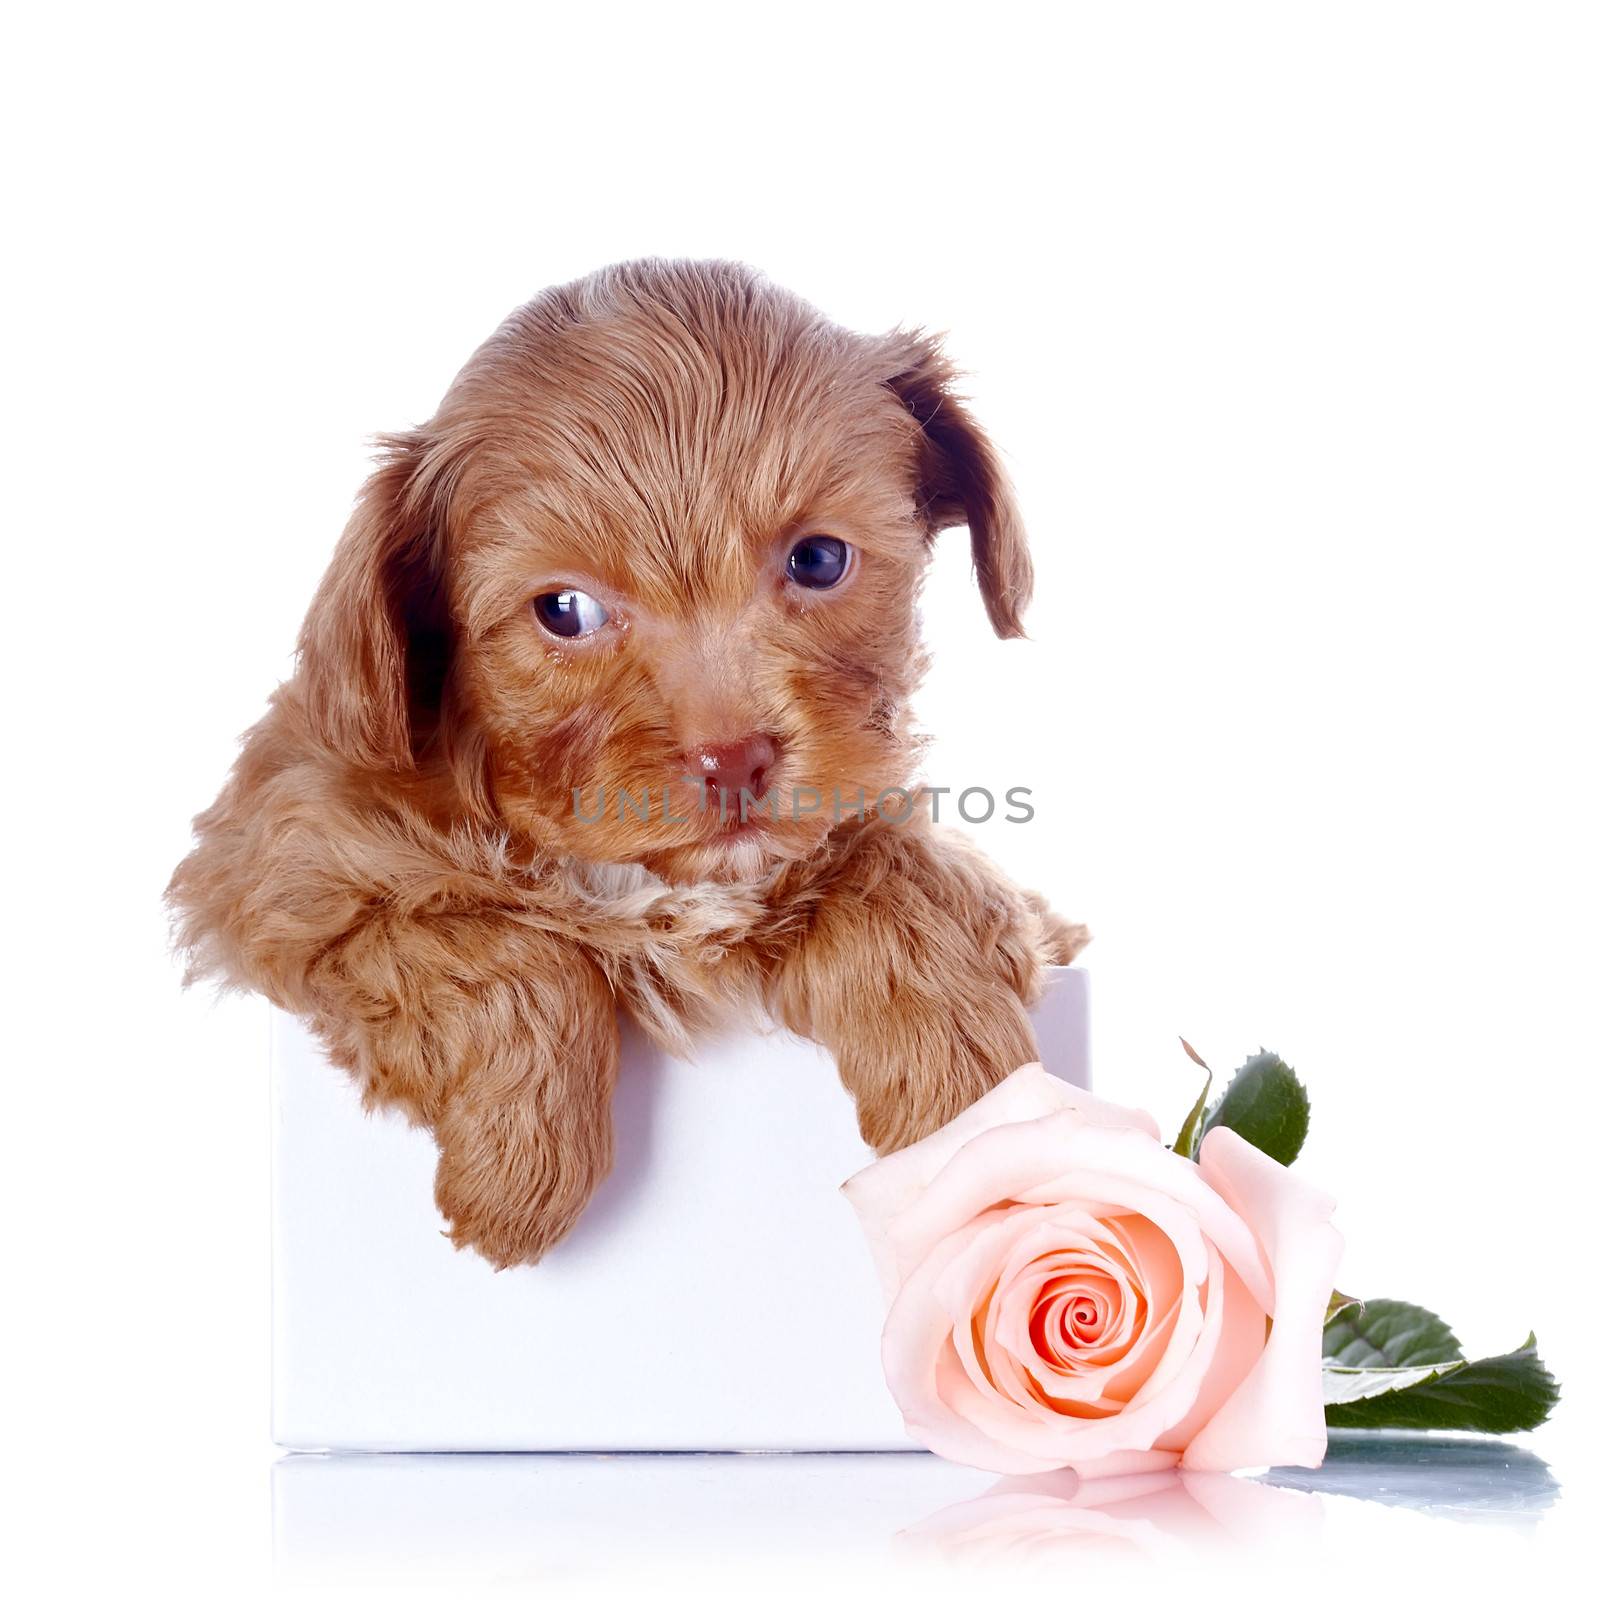 Puppy in a box and a rose. Puppy of a decorative doggie. Decorative dog. Puppy of the Petersburg orchid on a white background